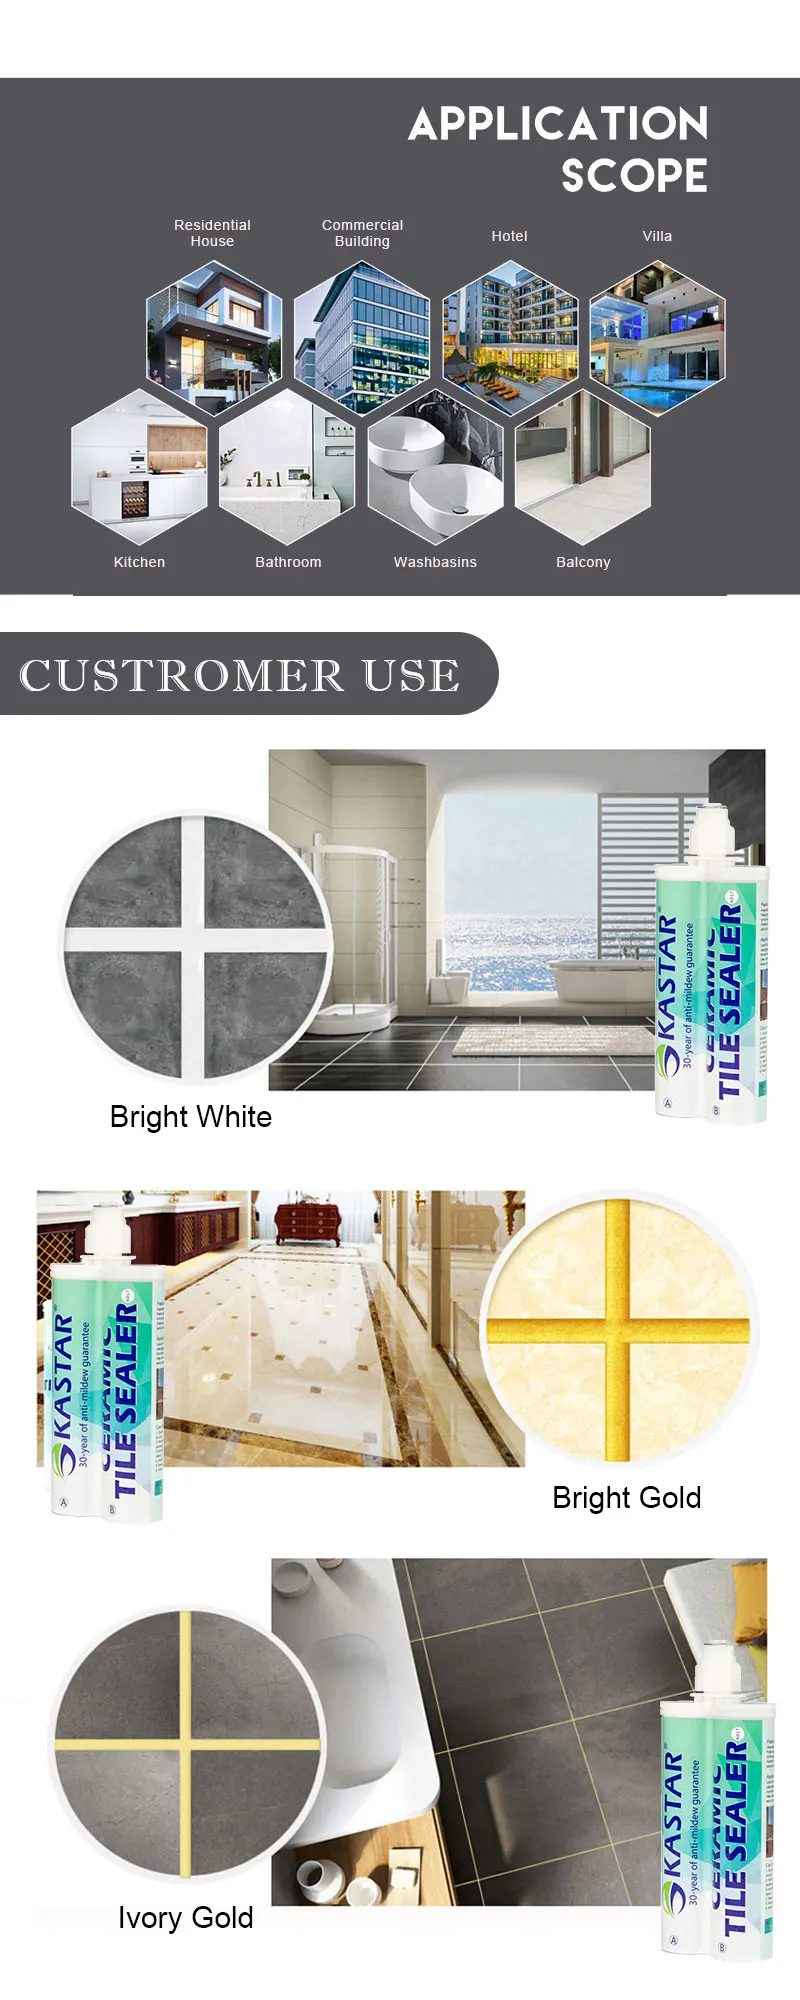 China Manufacturer Supplier Easy To Use Two Component Waterproof Colored Tile And Grout Cleaner